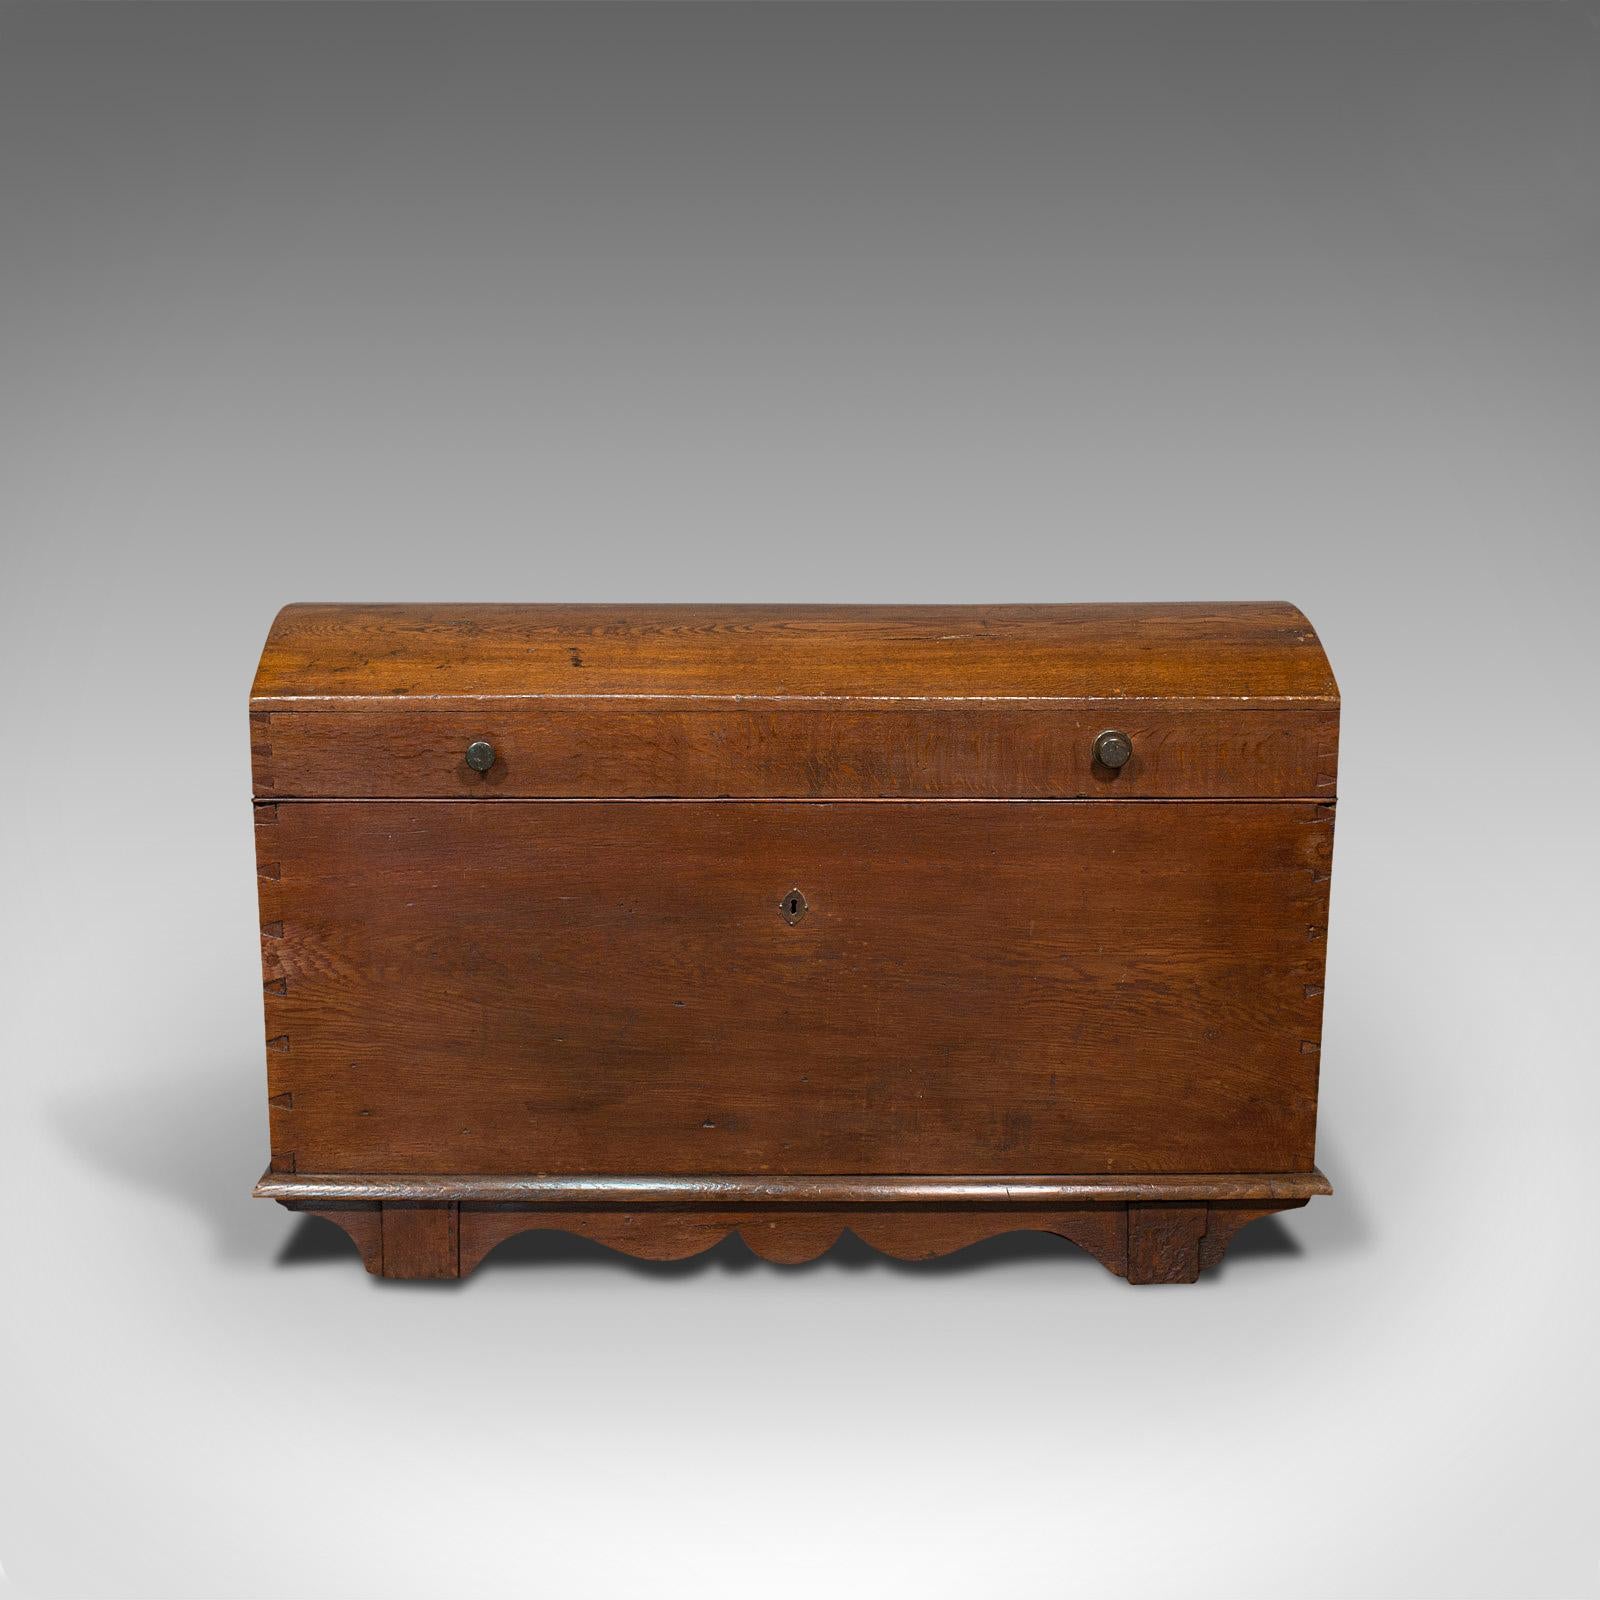 British Large Antique Shipping Chest, English, Oak, Carriage Trunk, Georgian, circa 1800 For Sale